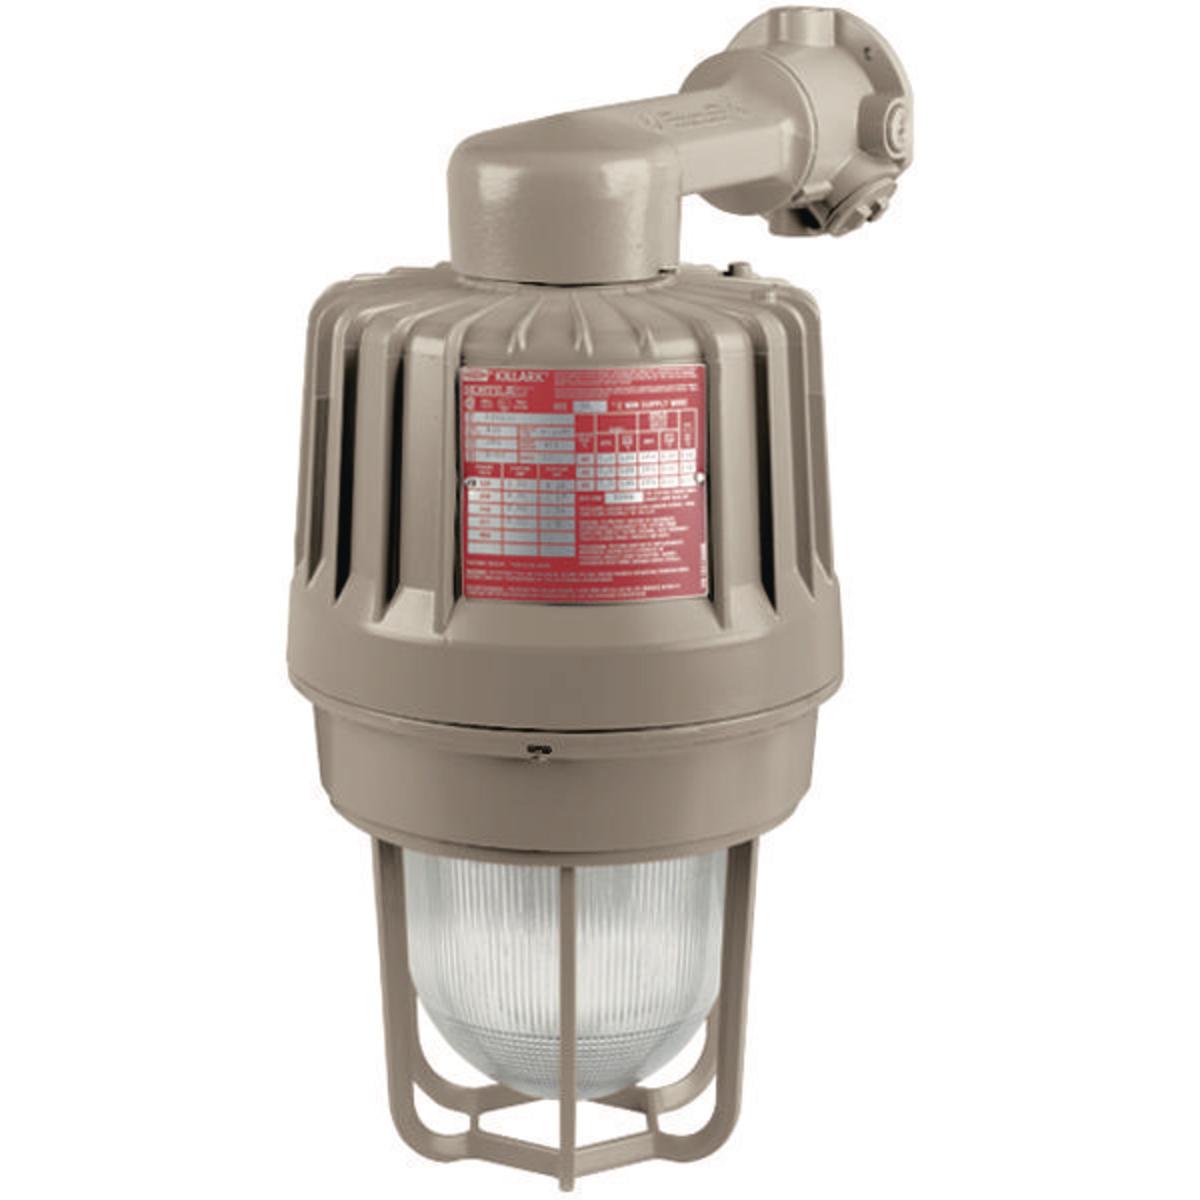 Hubbell EZS075B2G HID 70W 480V High Pressure Sodium 3/4" Wall Mount with Guard  ; Three light sources – High Pressure Sodium (50-400W), Metal Halide (70-400W) and Pulse Start Metal Halide (175-400W) ; Mounting choice –Pendant, ceiling, 25˚ stanchion or 90˚ wall mount, all 